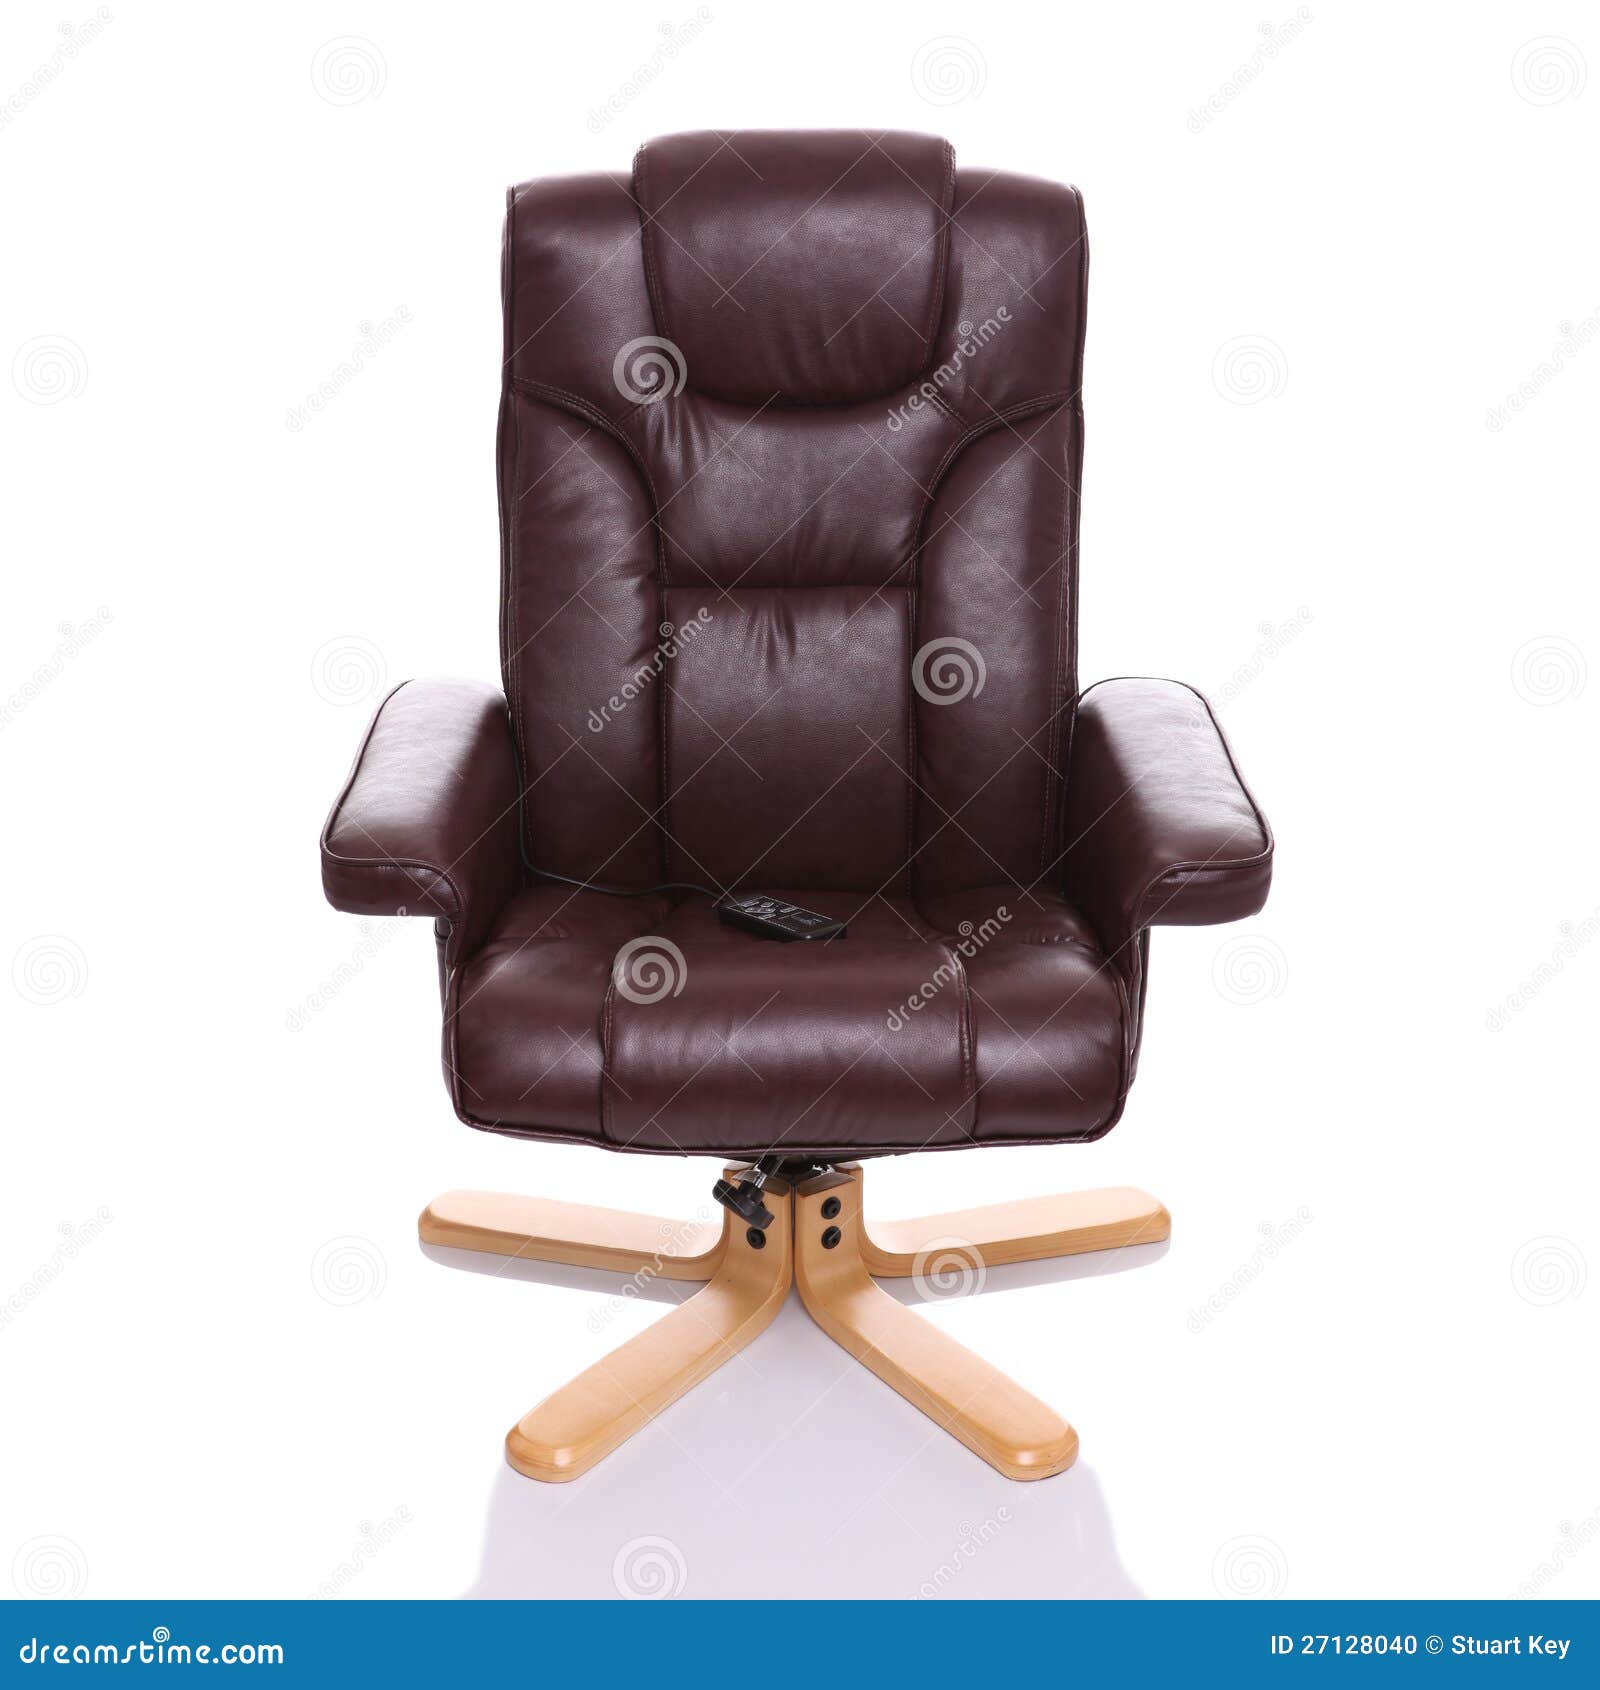 leather heated recliner chair